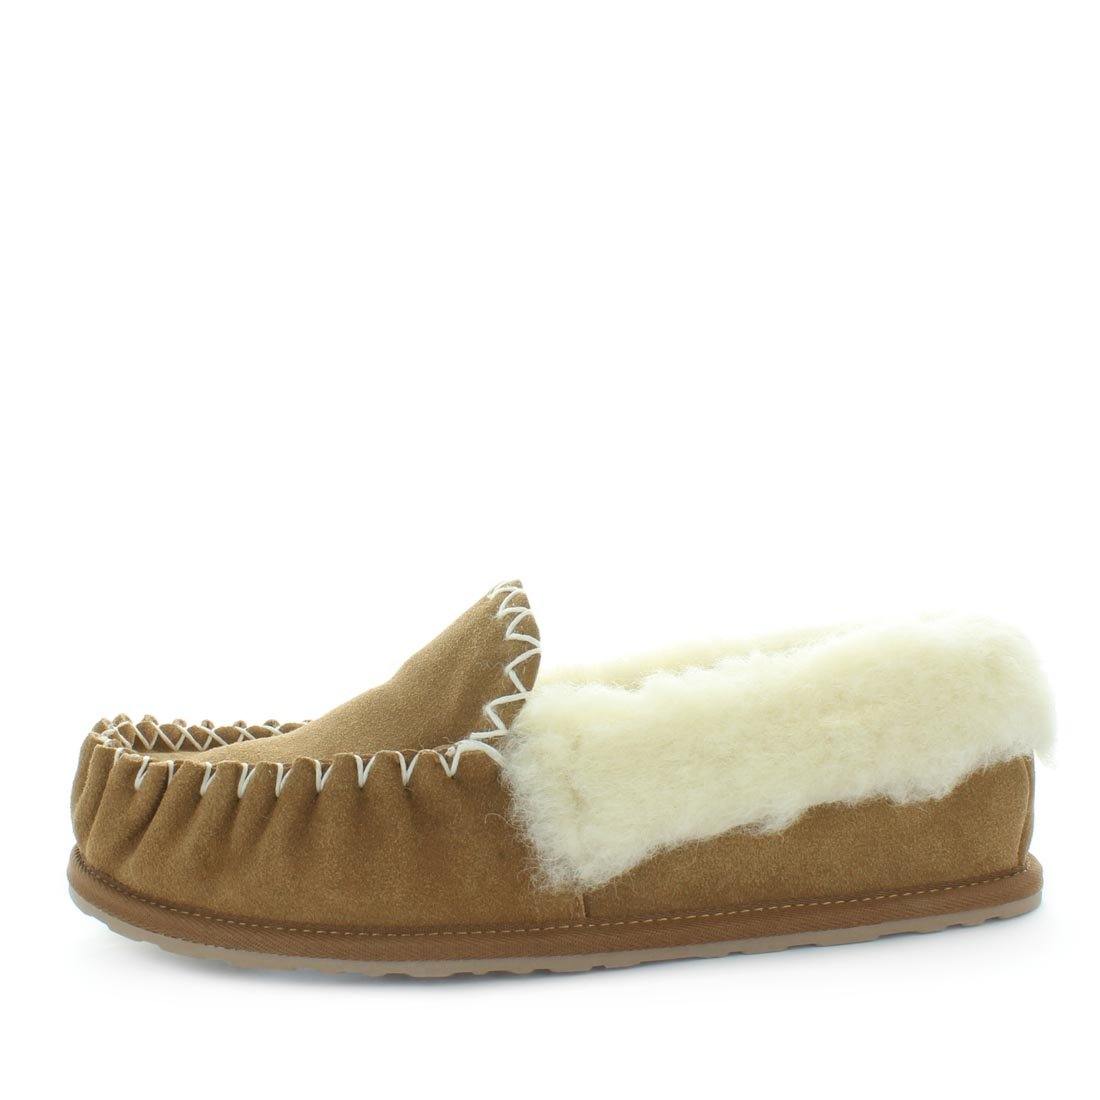 Mens slipper chums by just bee uggs, uggs boots - just bee slippers - mens slippers, moccasin slippers, wool slippers, 100% wool slippers.